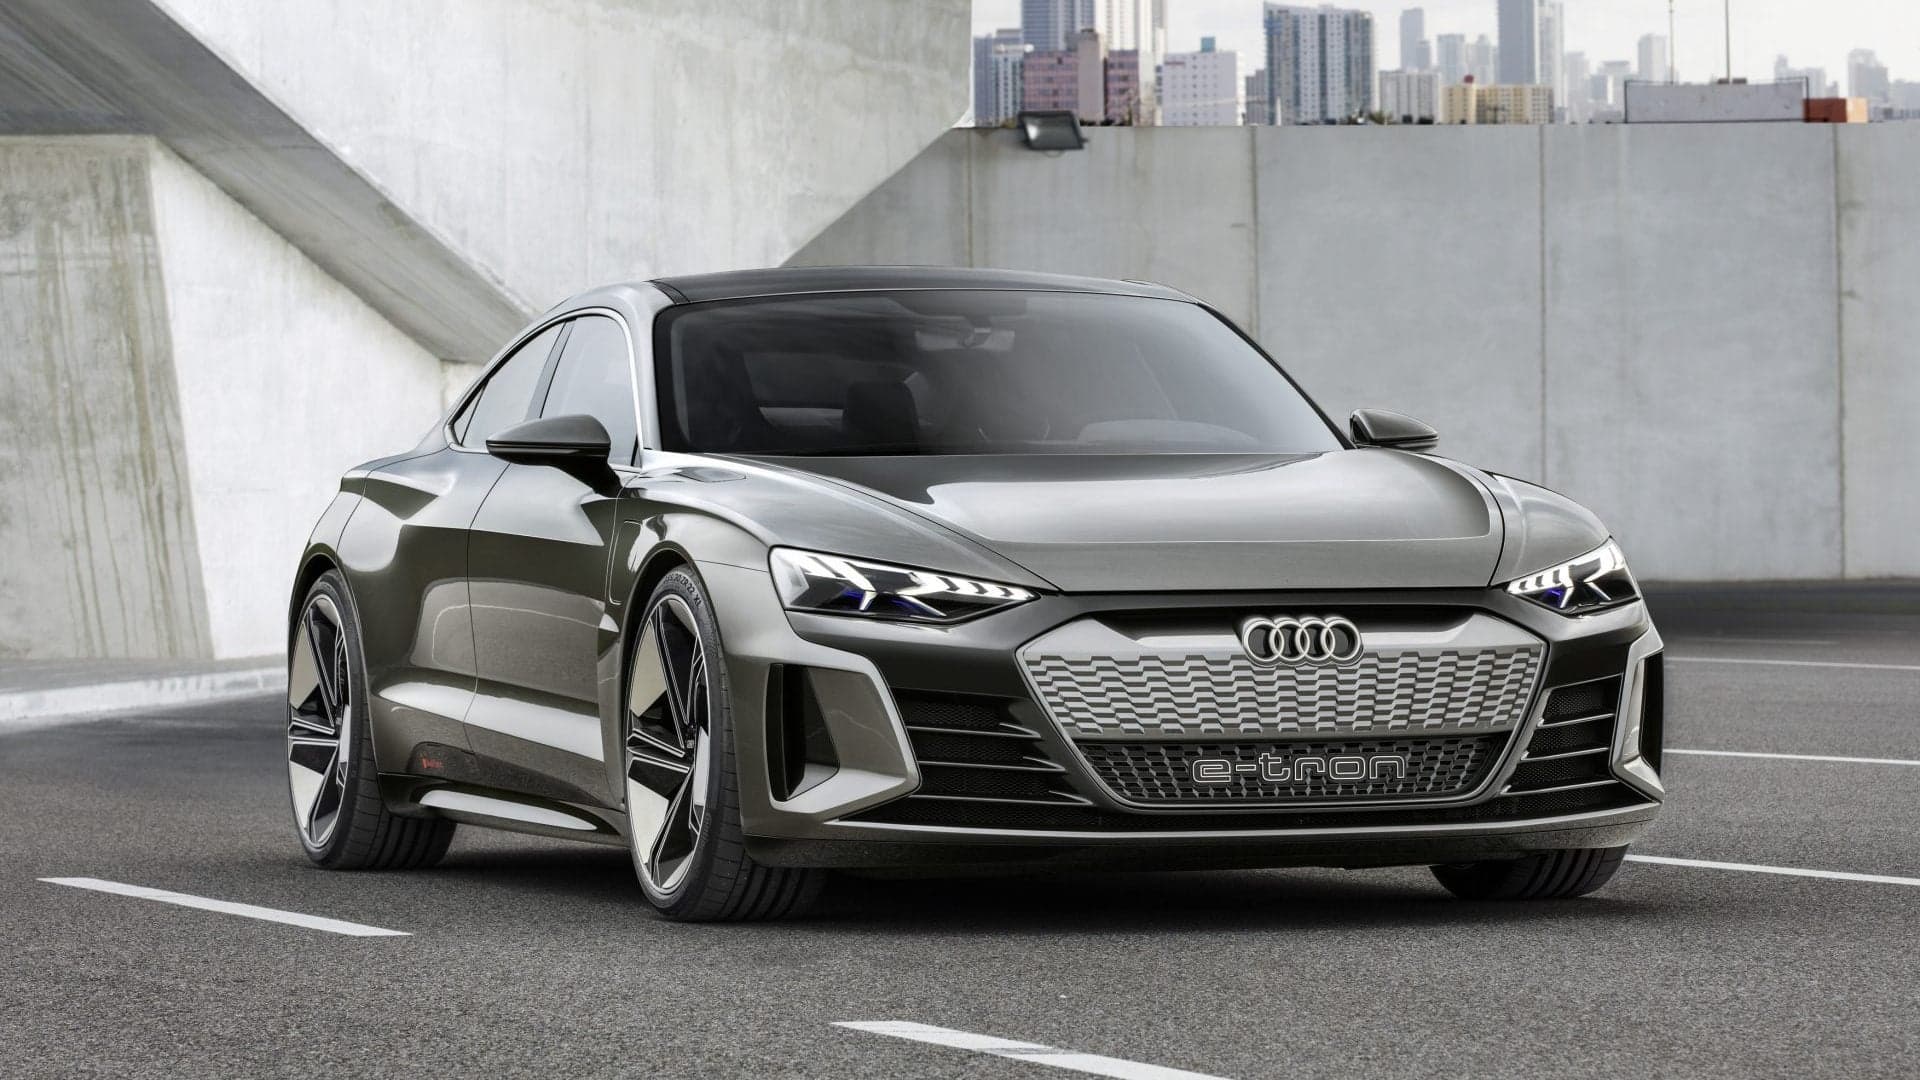 Watch the Gorgeous Audi E-Tron GT Drive Under Its Own Power